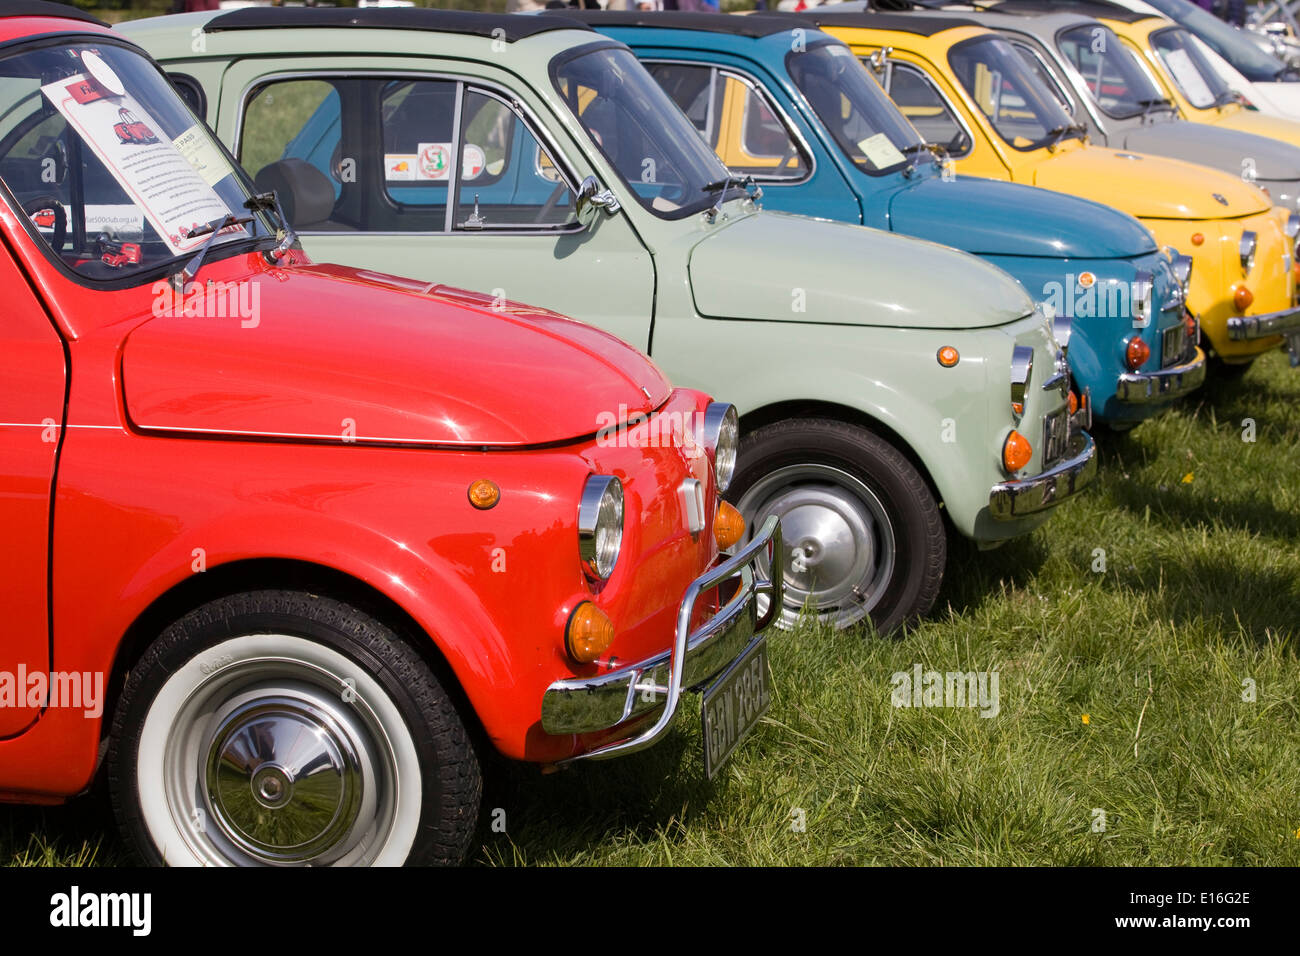 Row of Vintage Fiat 500's at a show Stock Photo